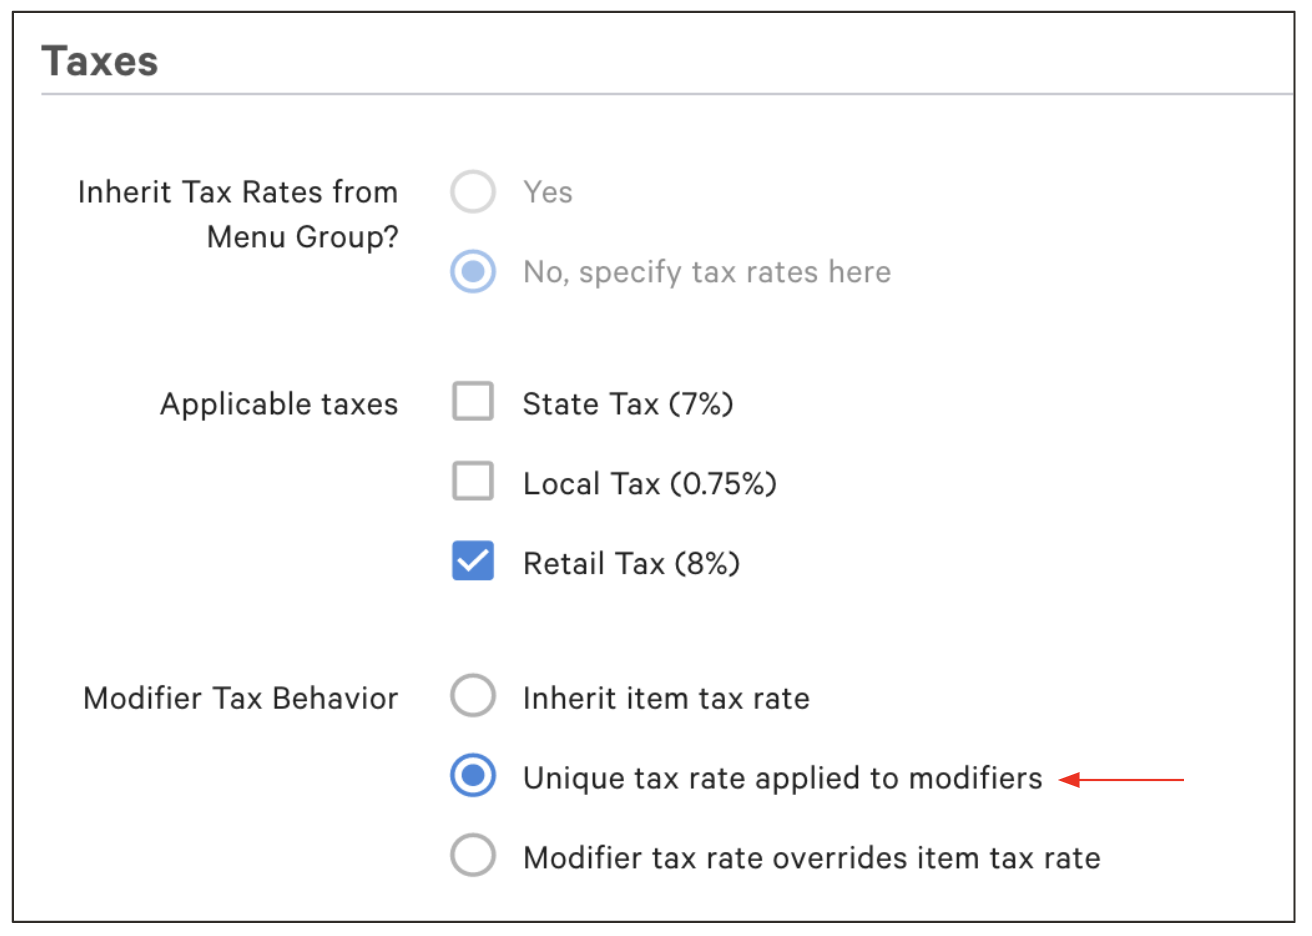 Selecting the unique tax tax rate for the modifier.